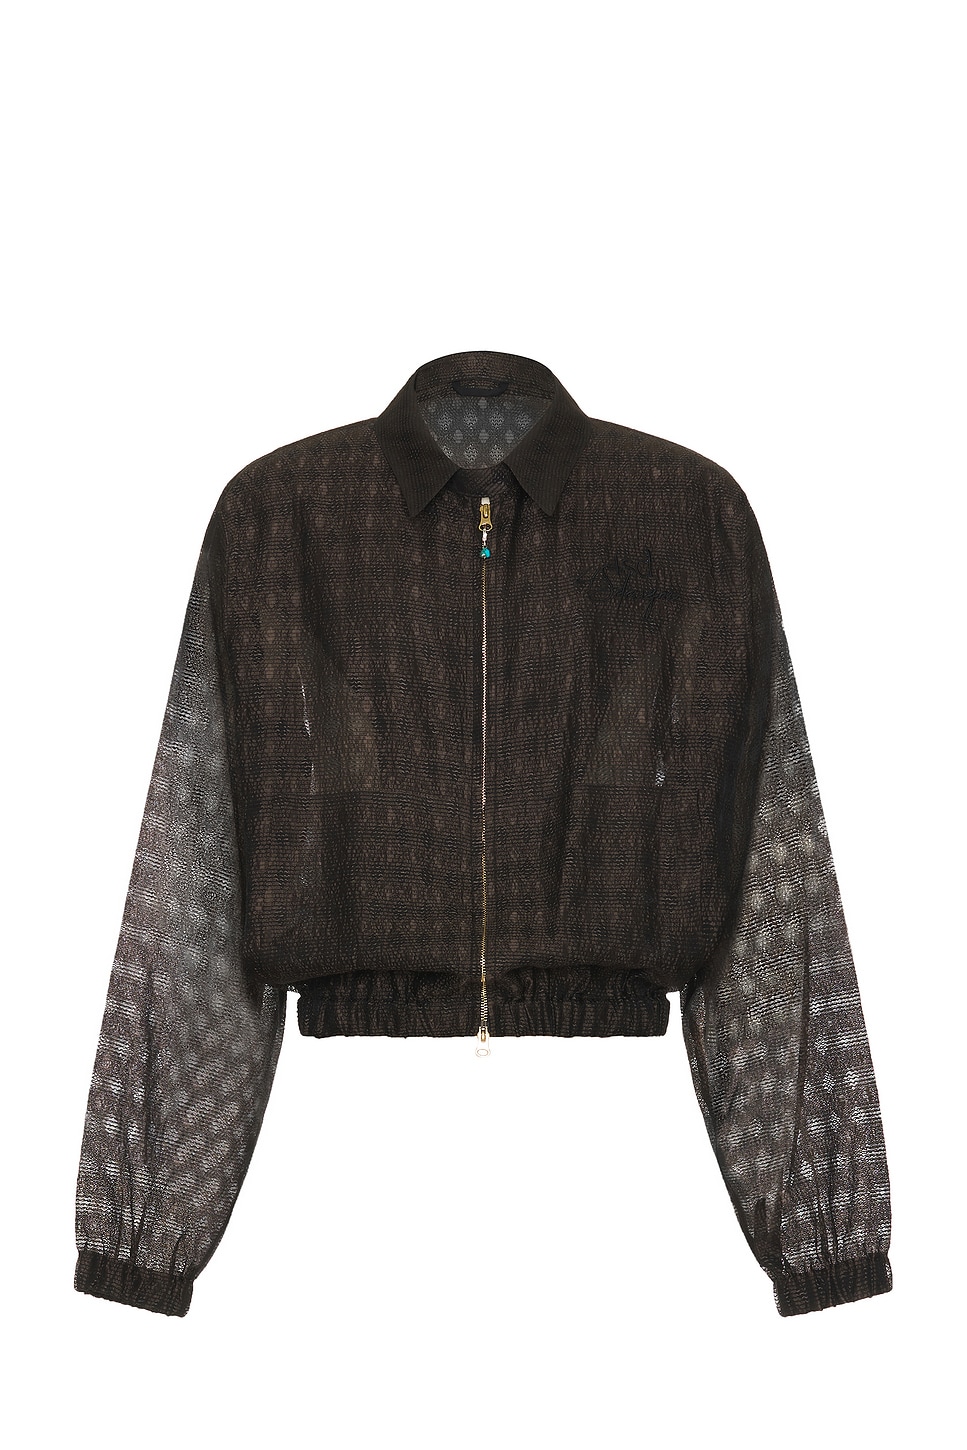 Image 1 of 4SDESIGNS Caddy Shirt Jacket in Brown